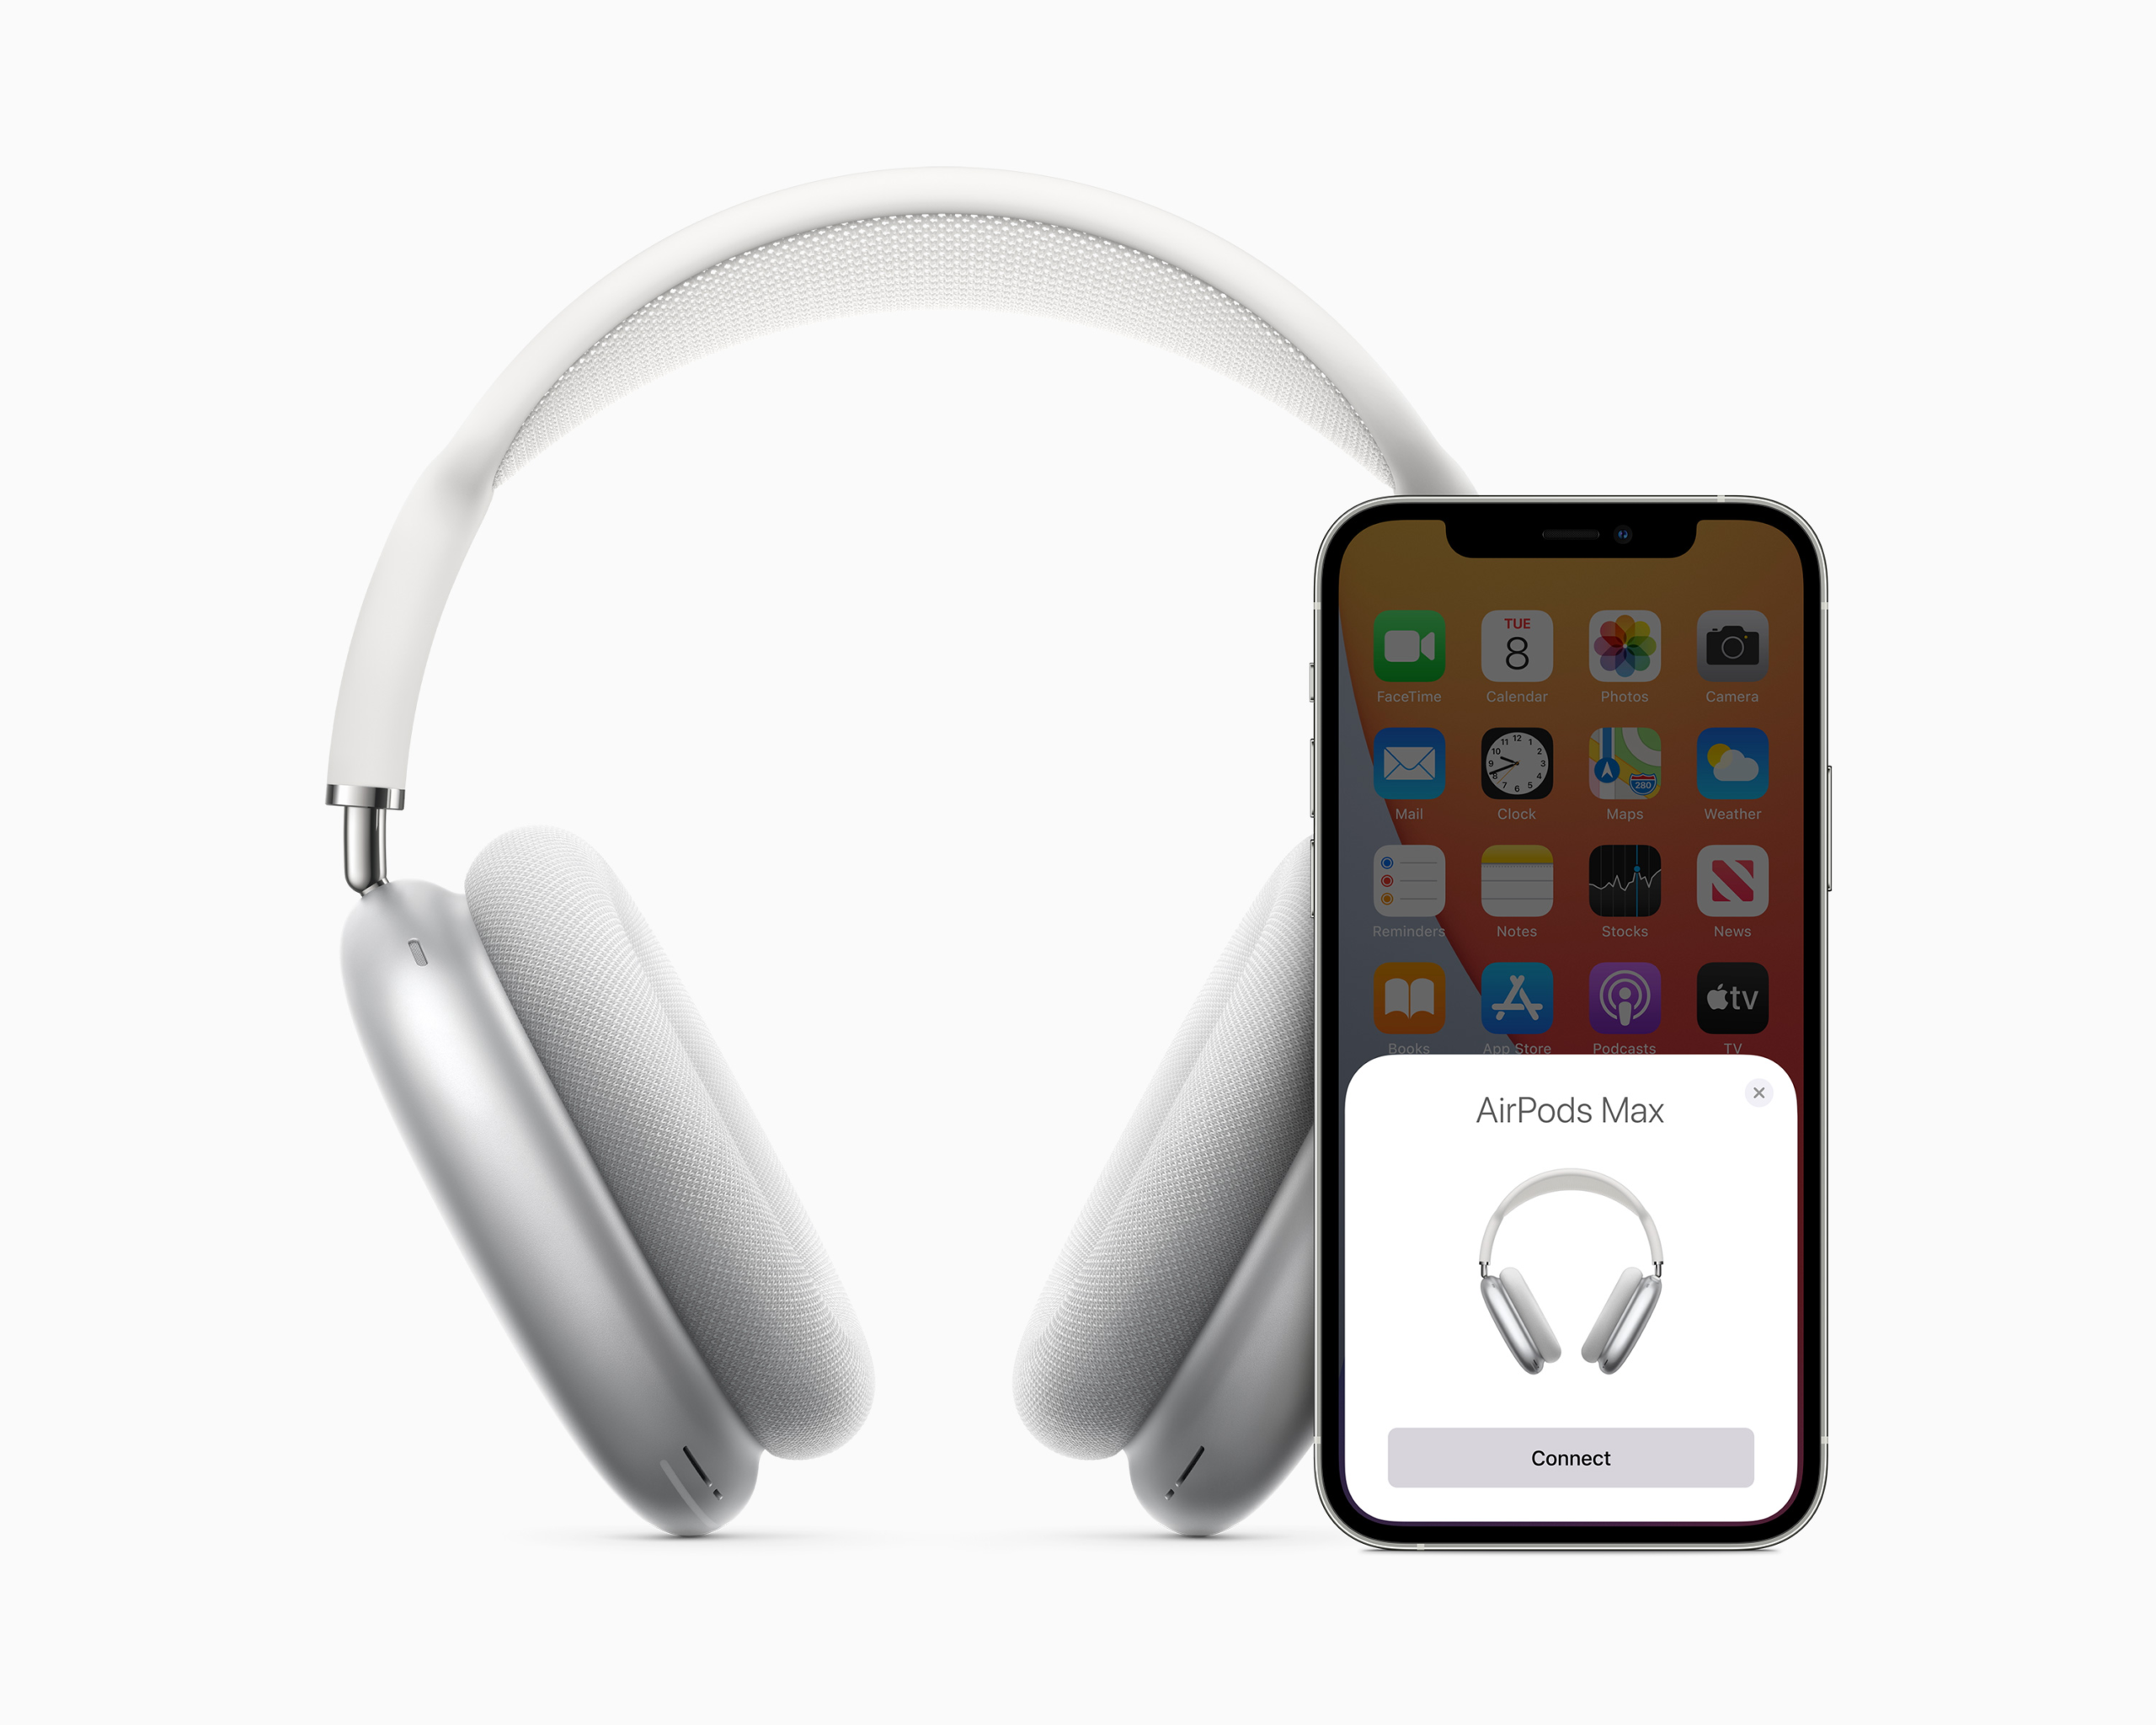 Apple launches new over-ear Headphones worth over KES. 60,000